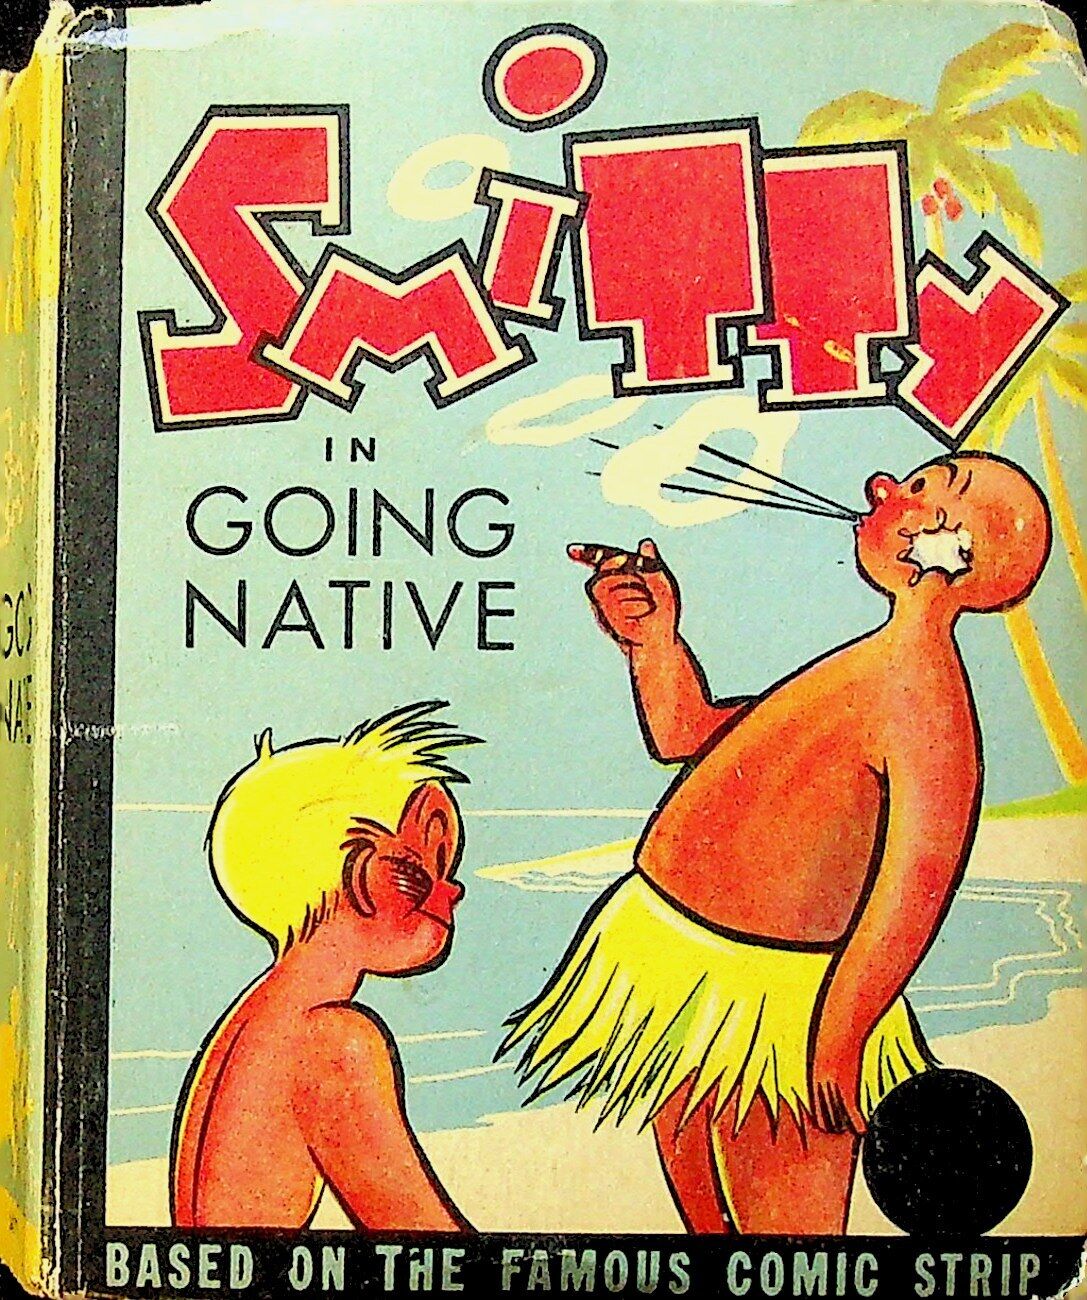 Smitty in Going Native #1477 FN 1938